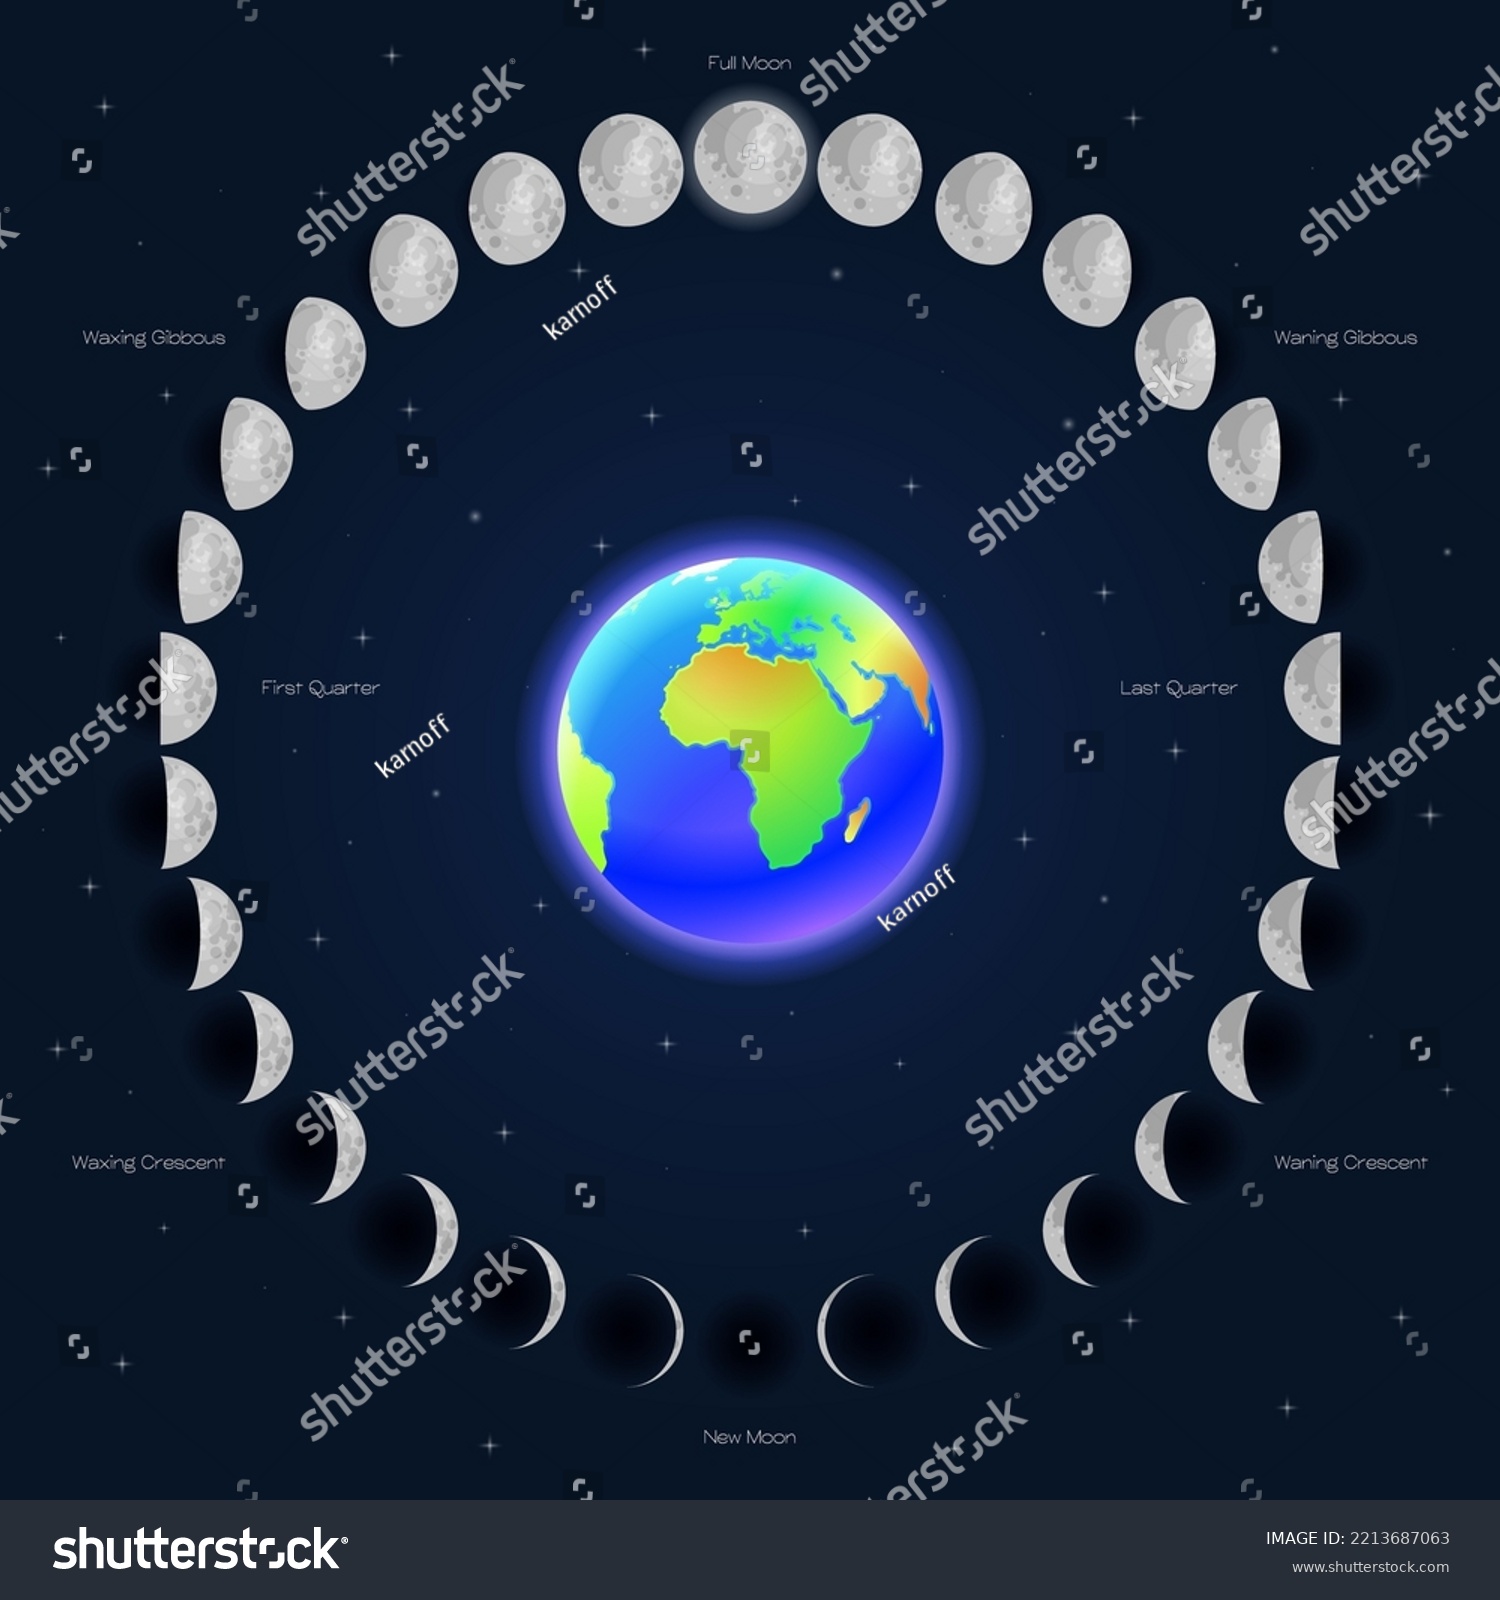 Moon Phases Sphere Shadow Cycle Astronomy Stock Vector (Royalty Free ...